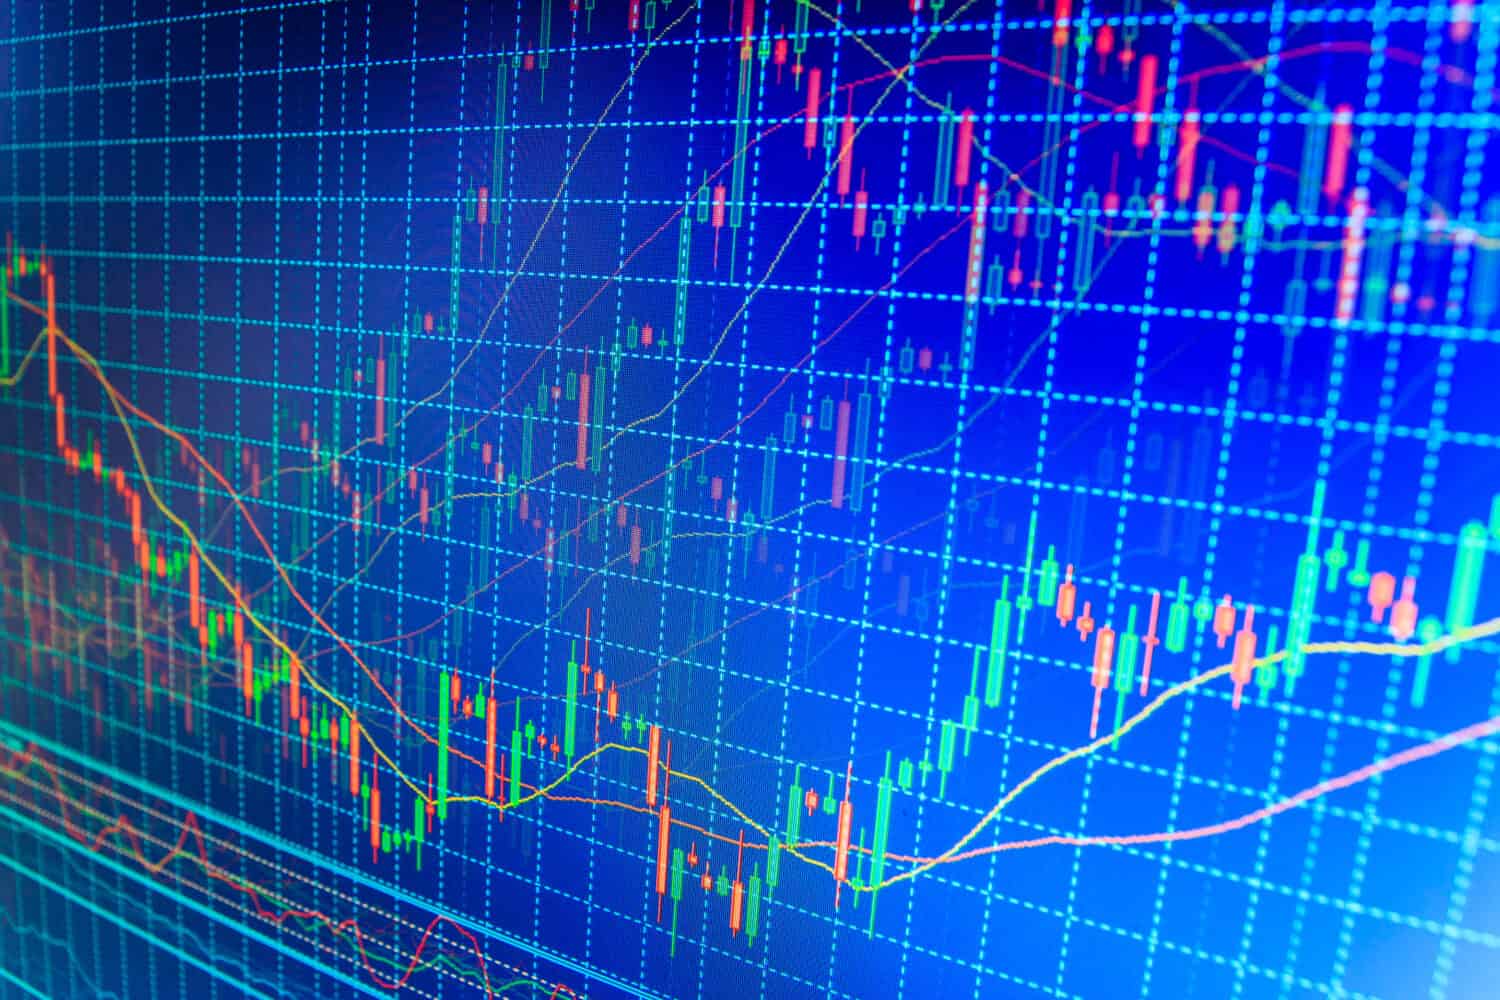 Tools of technical analysis. Financial diagram with candlestick chart. Live stock trading online. Data on live computer screen. Professional market analysis.